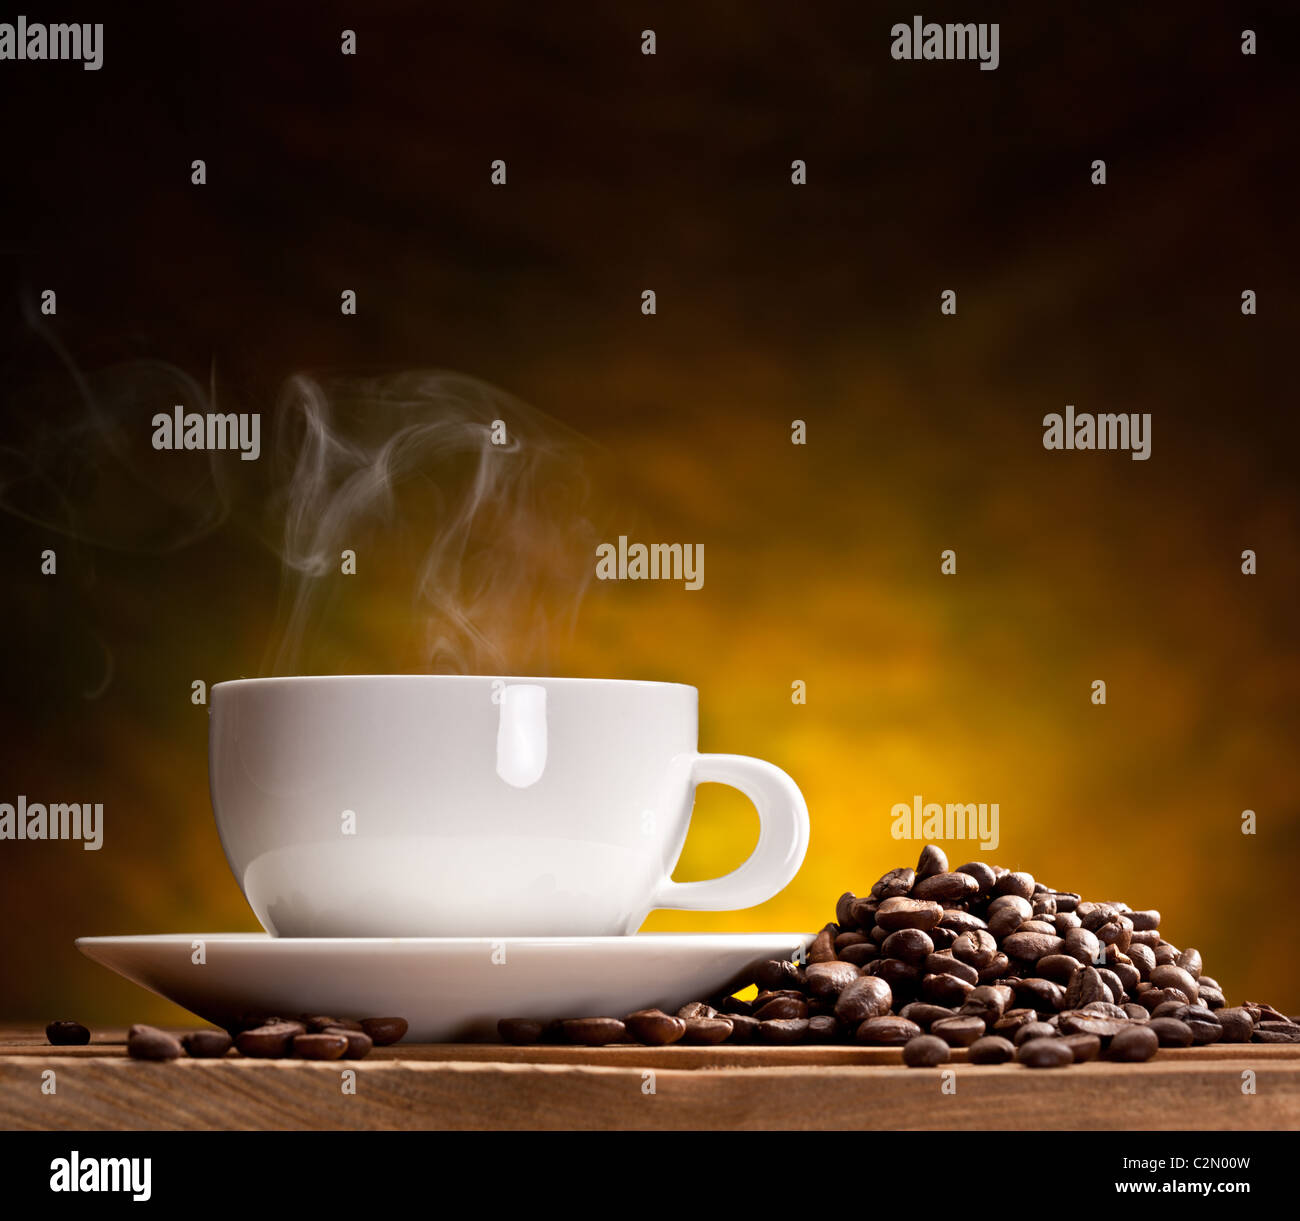 Cup of coffee with coffee beans on a beautiful brown background. Stock Photo